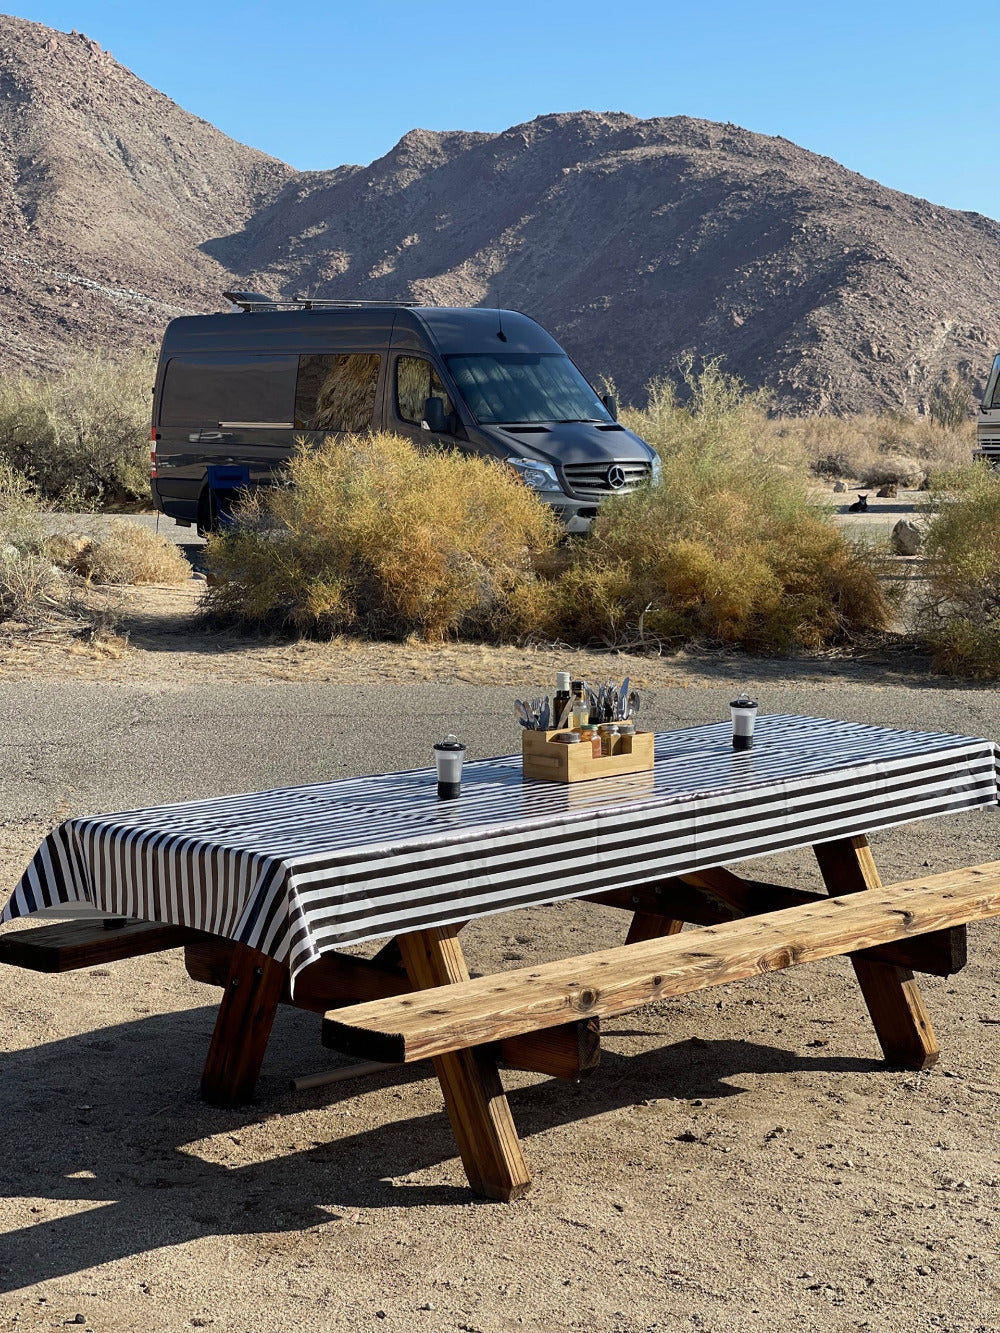 a picnic table at a desert camping site with a black and white striped outdoor tablecloth